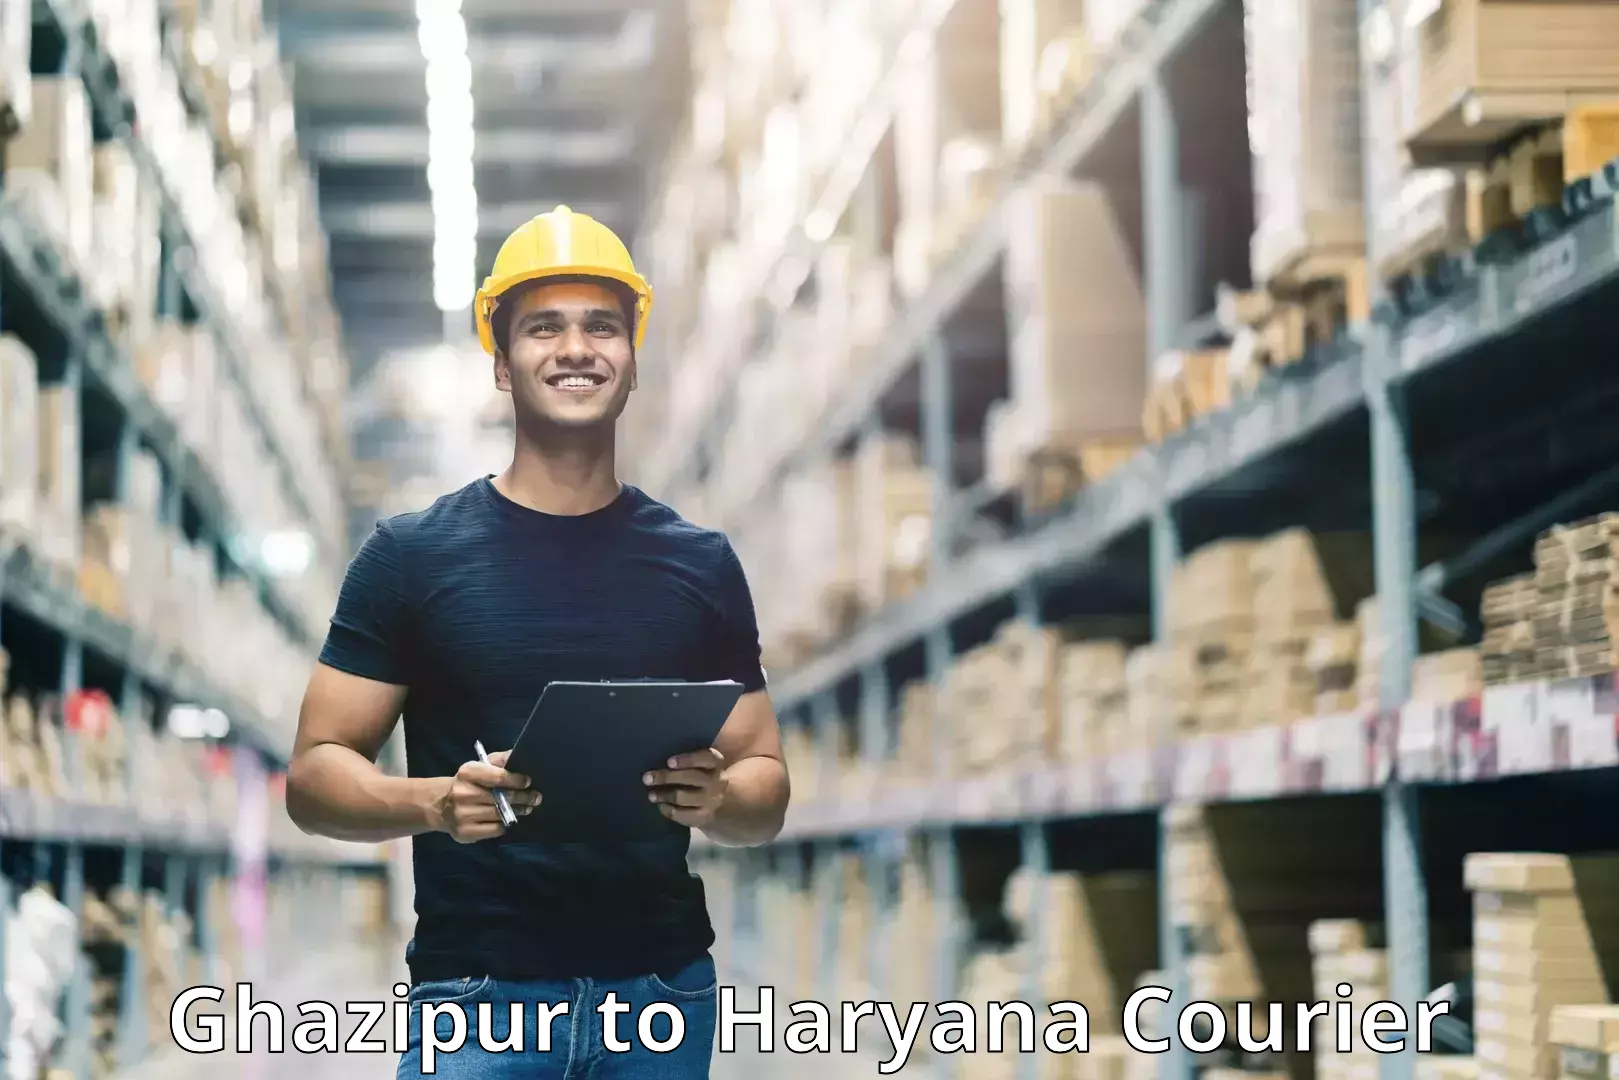 Courier service partnerships Ghazipur to Haryana